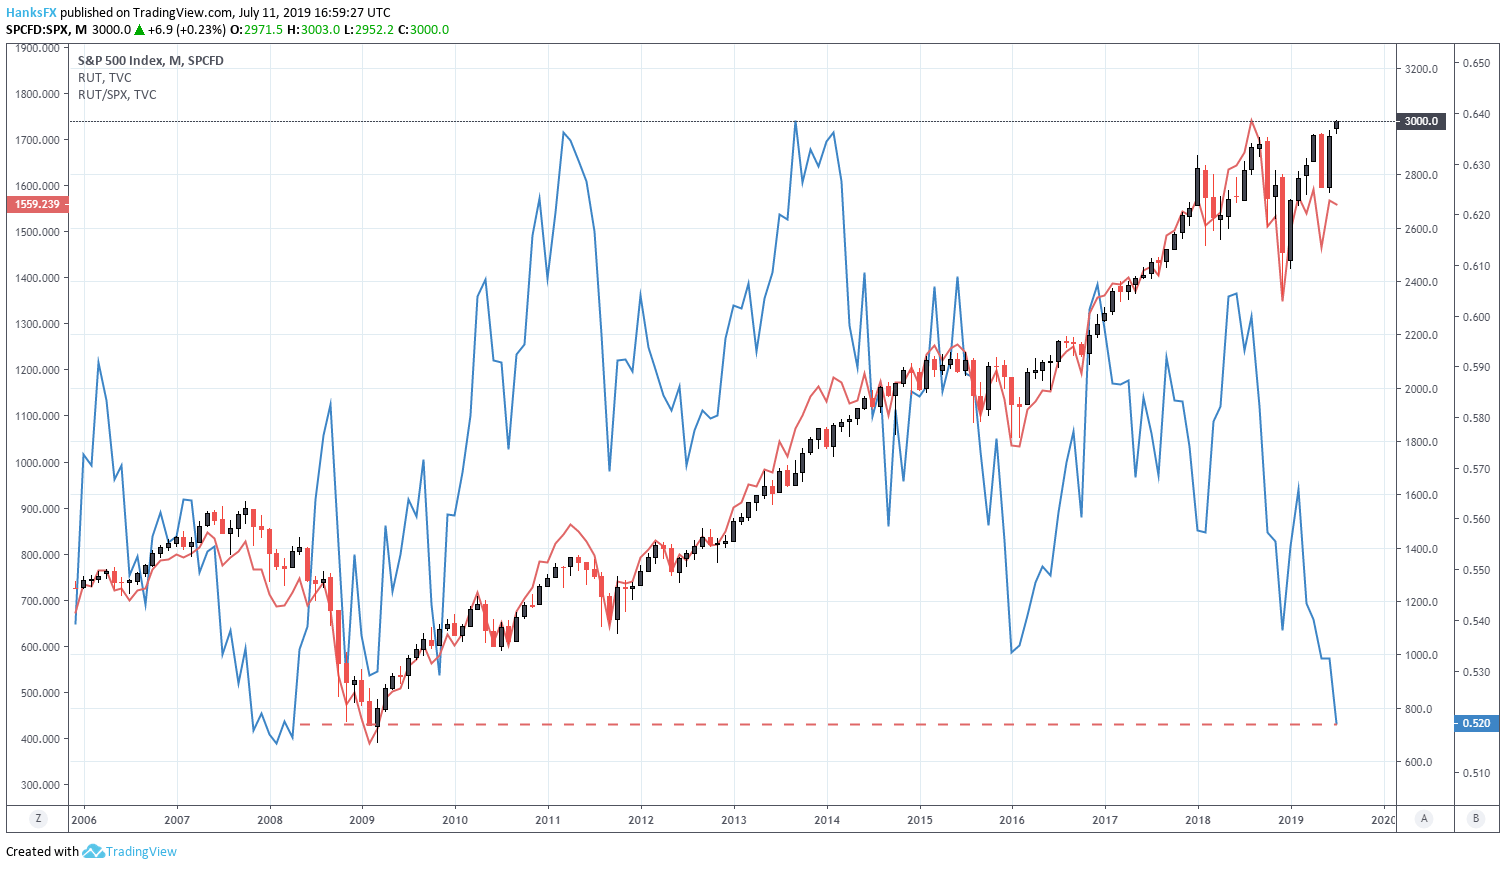 S&P 500 and Russell 2000 ratio